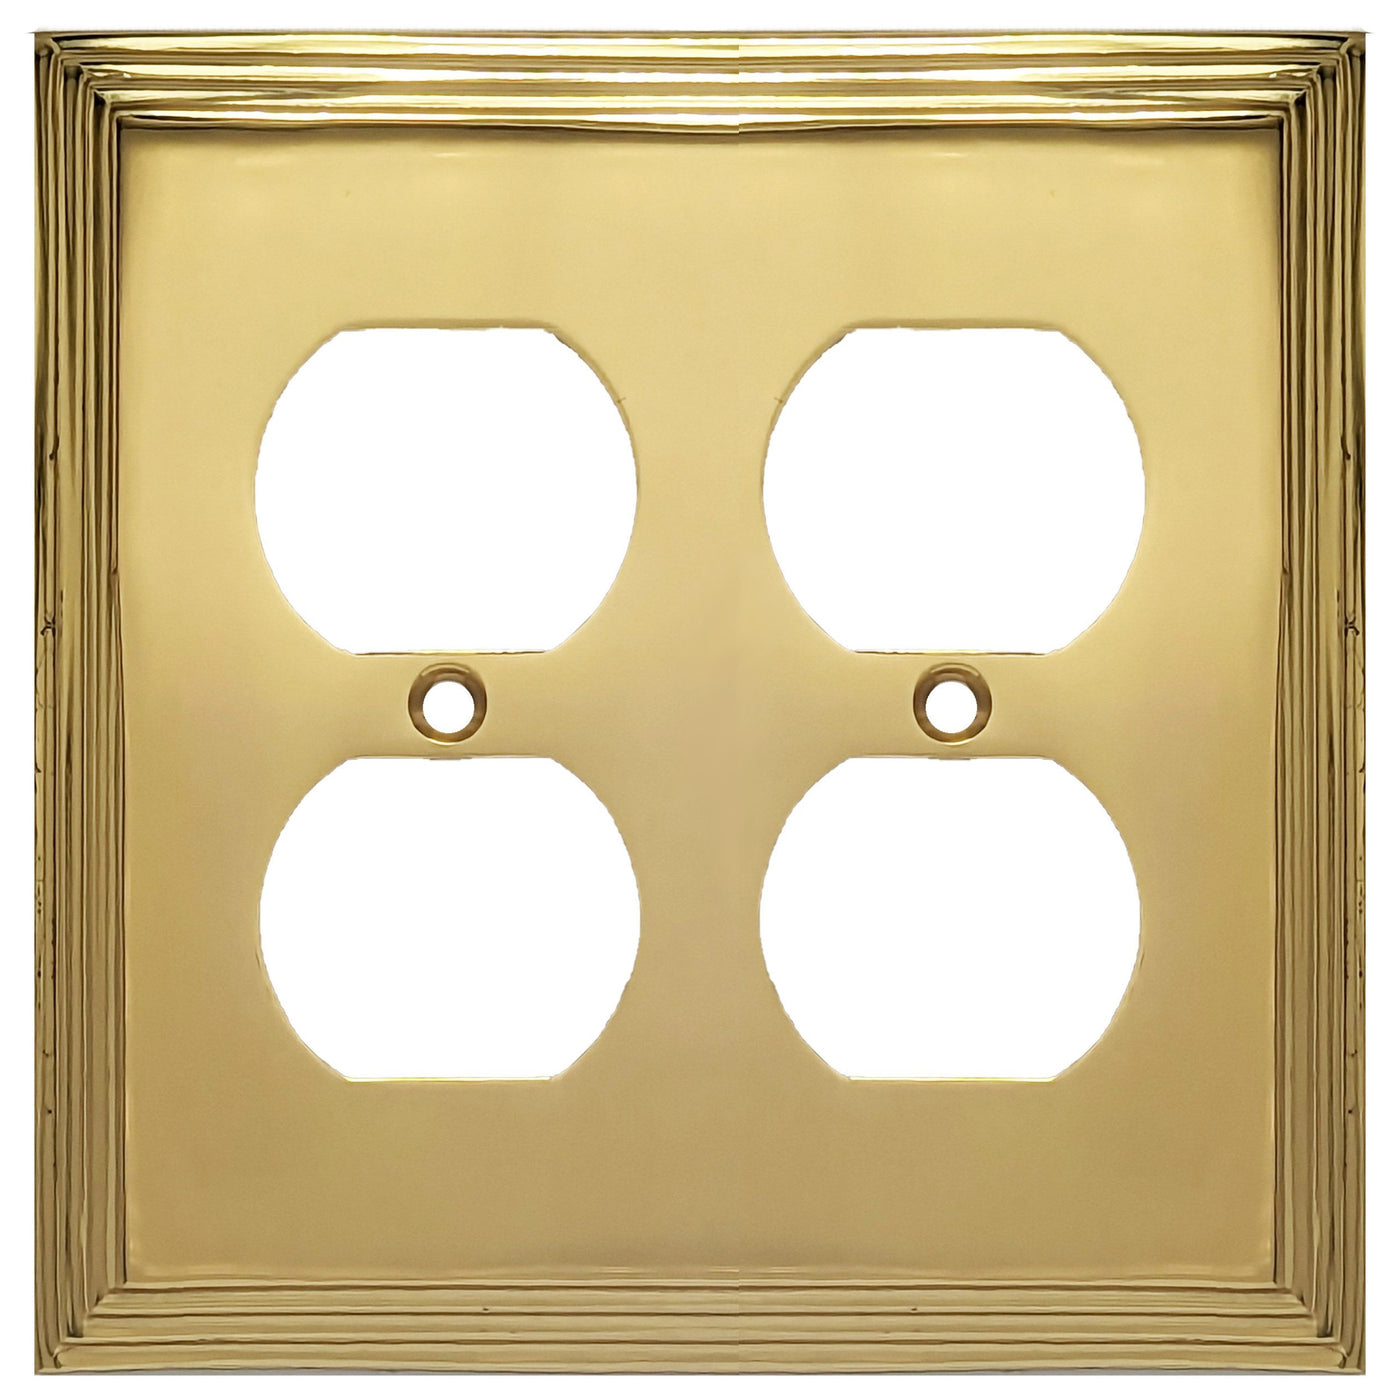 Kingston Classic Stepped Wall Plate (Polished Brass)